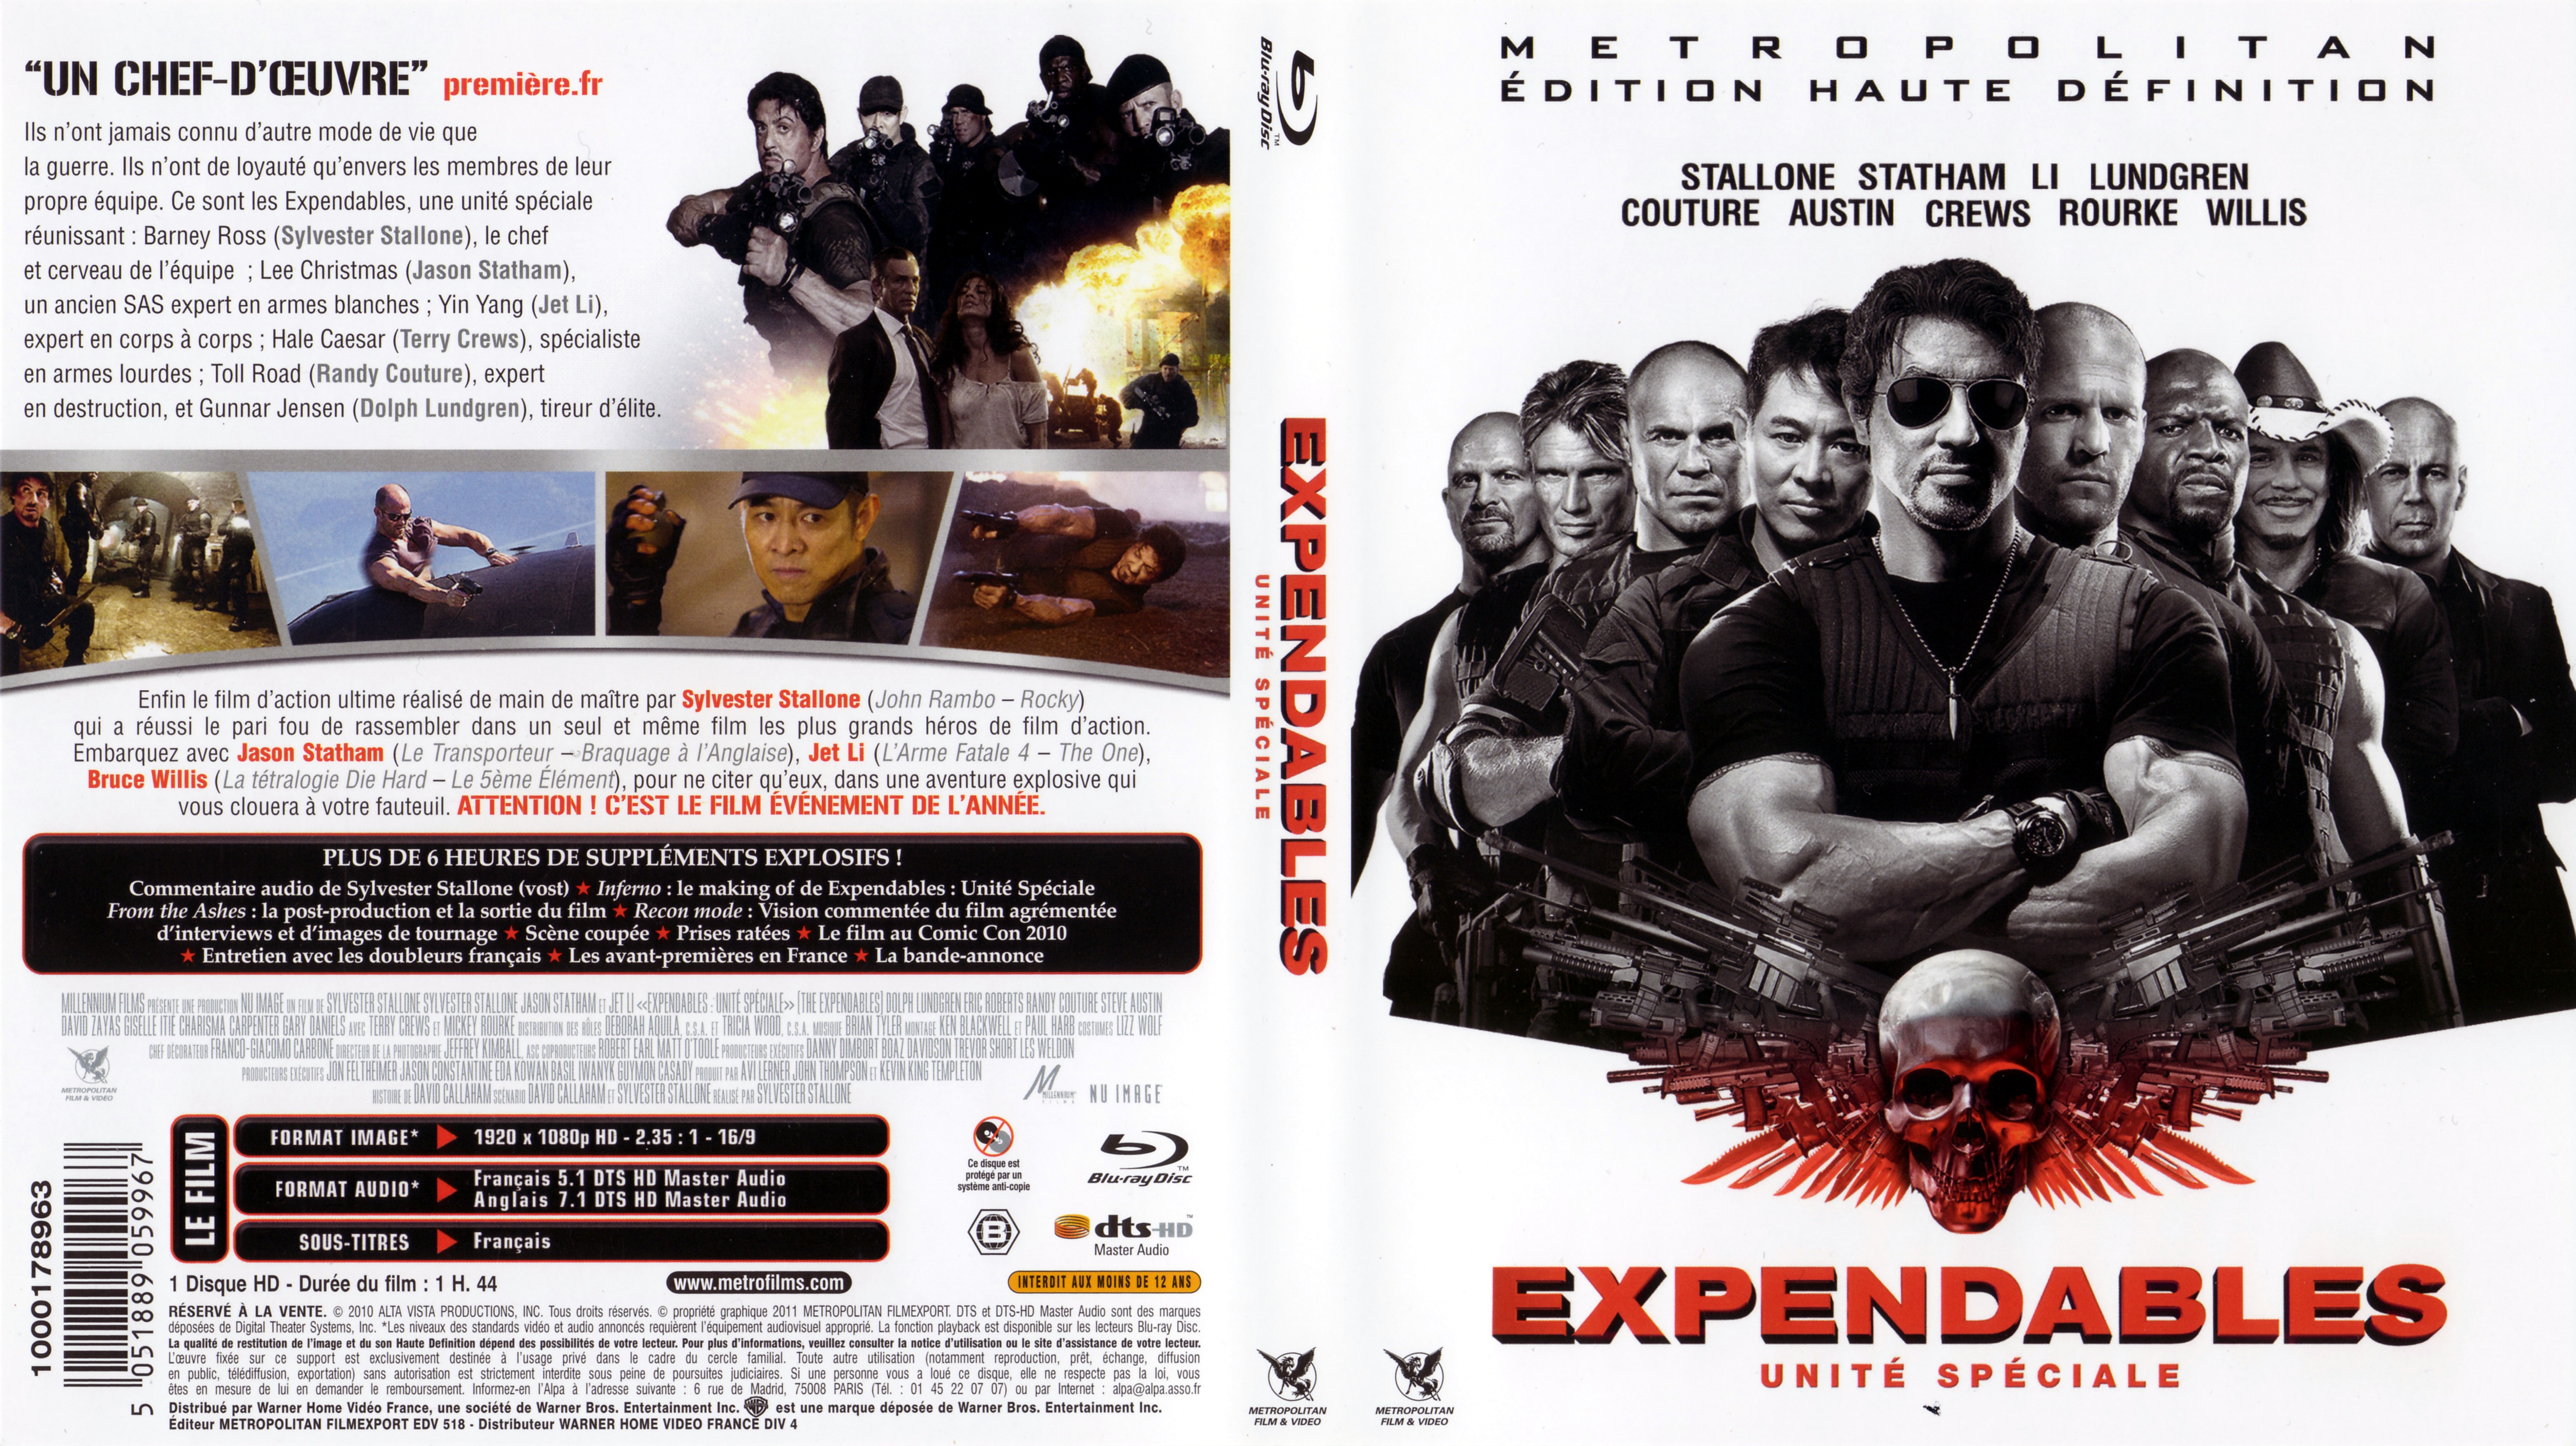 Jaquette DVD Expendables (BLU-RAY) v4